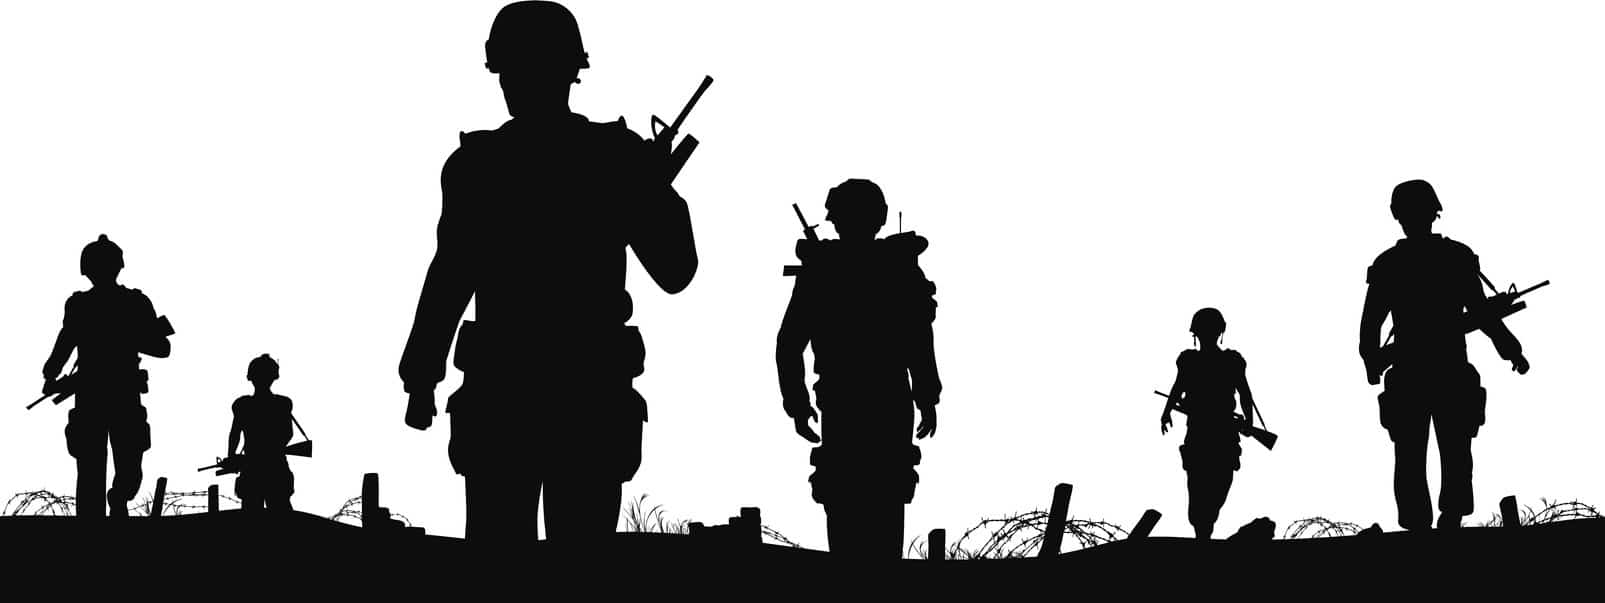 Editable vector foreground of silhouettes of walking soldiers on patrol with figures as separate elements